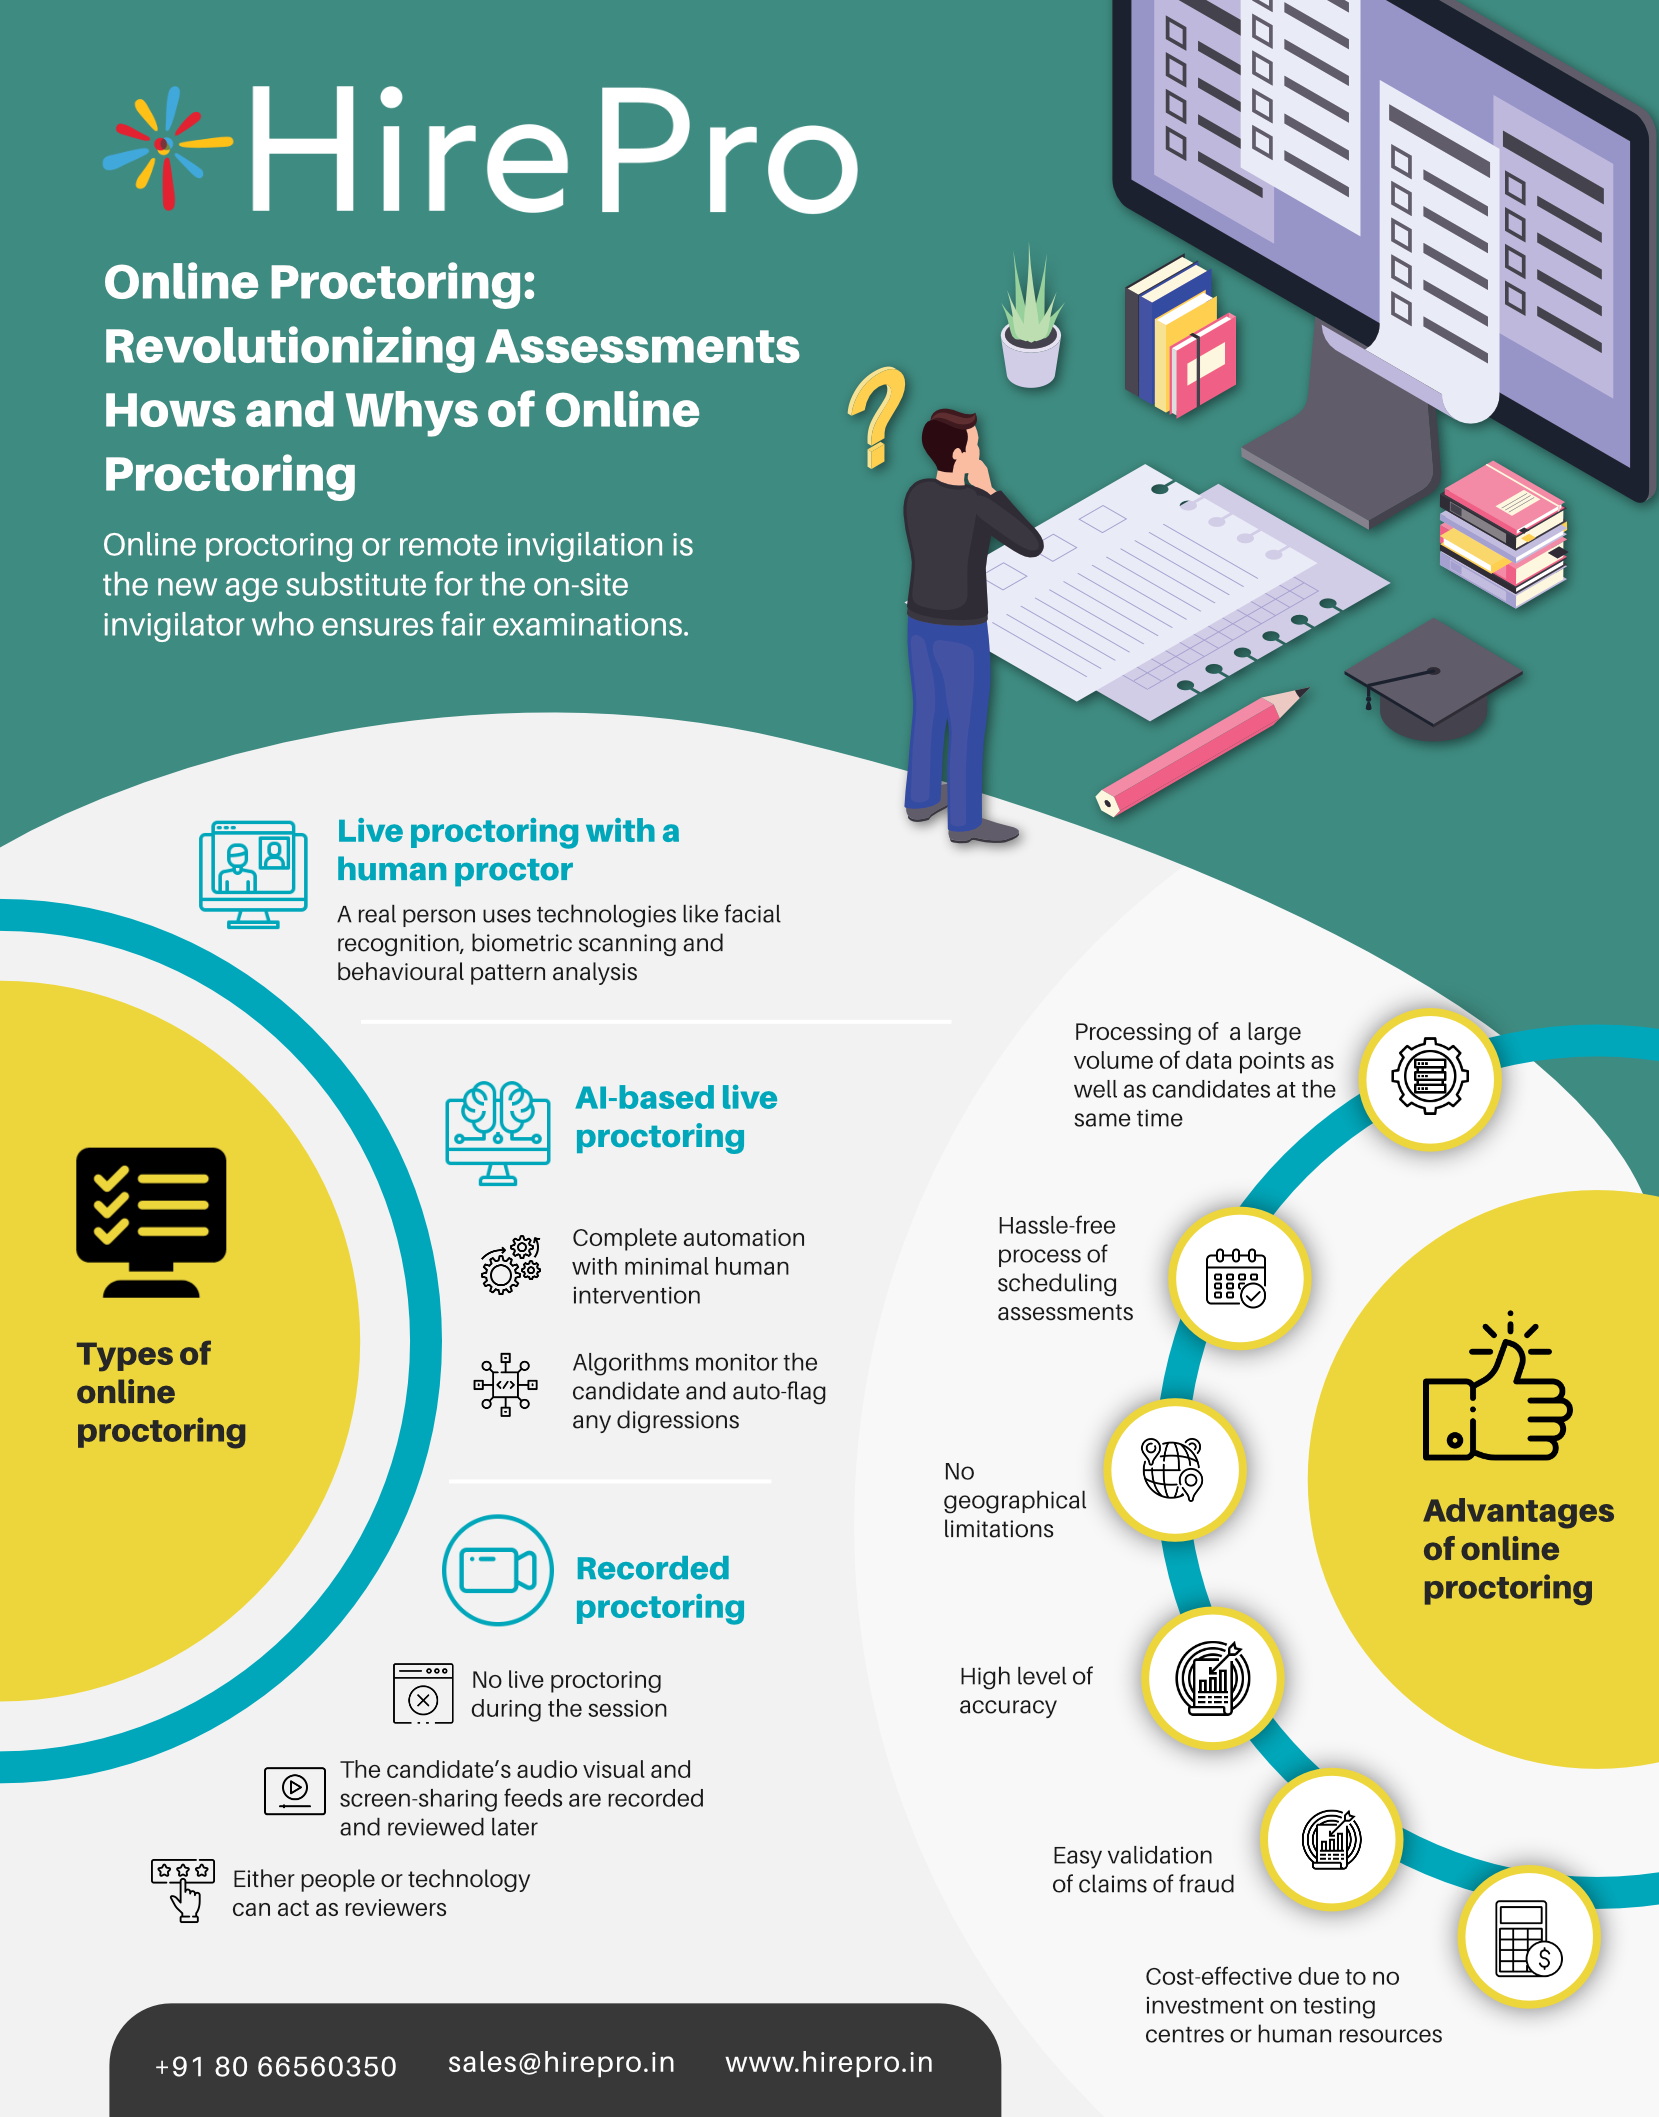 Online Proctoring: Revolutionizing Assessments Hows and Whys of Online Proctoring